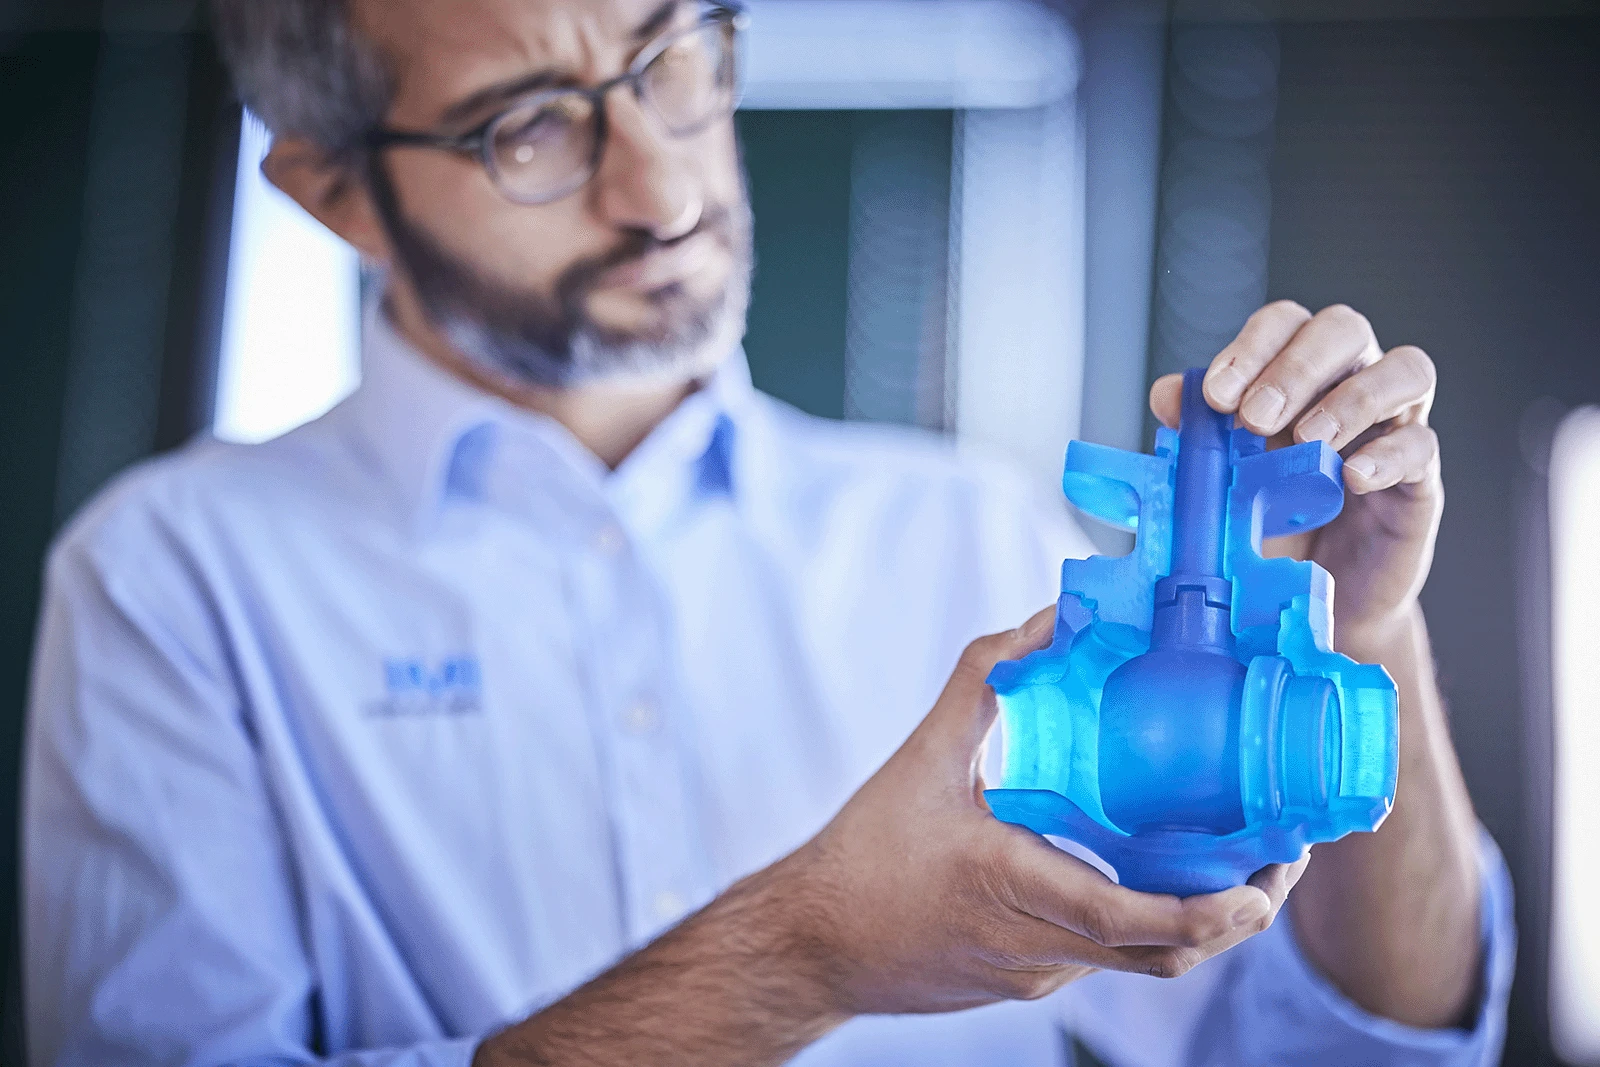 IMI Critical engineer displaying a 3D printed demo valve to colleagues in a well-equipped facility.